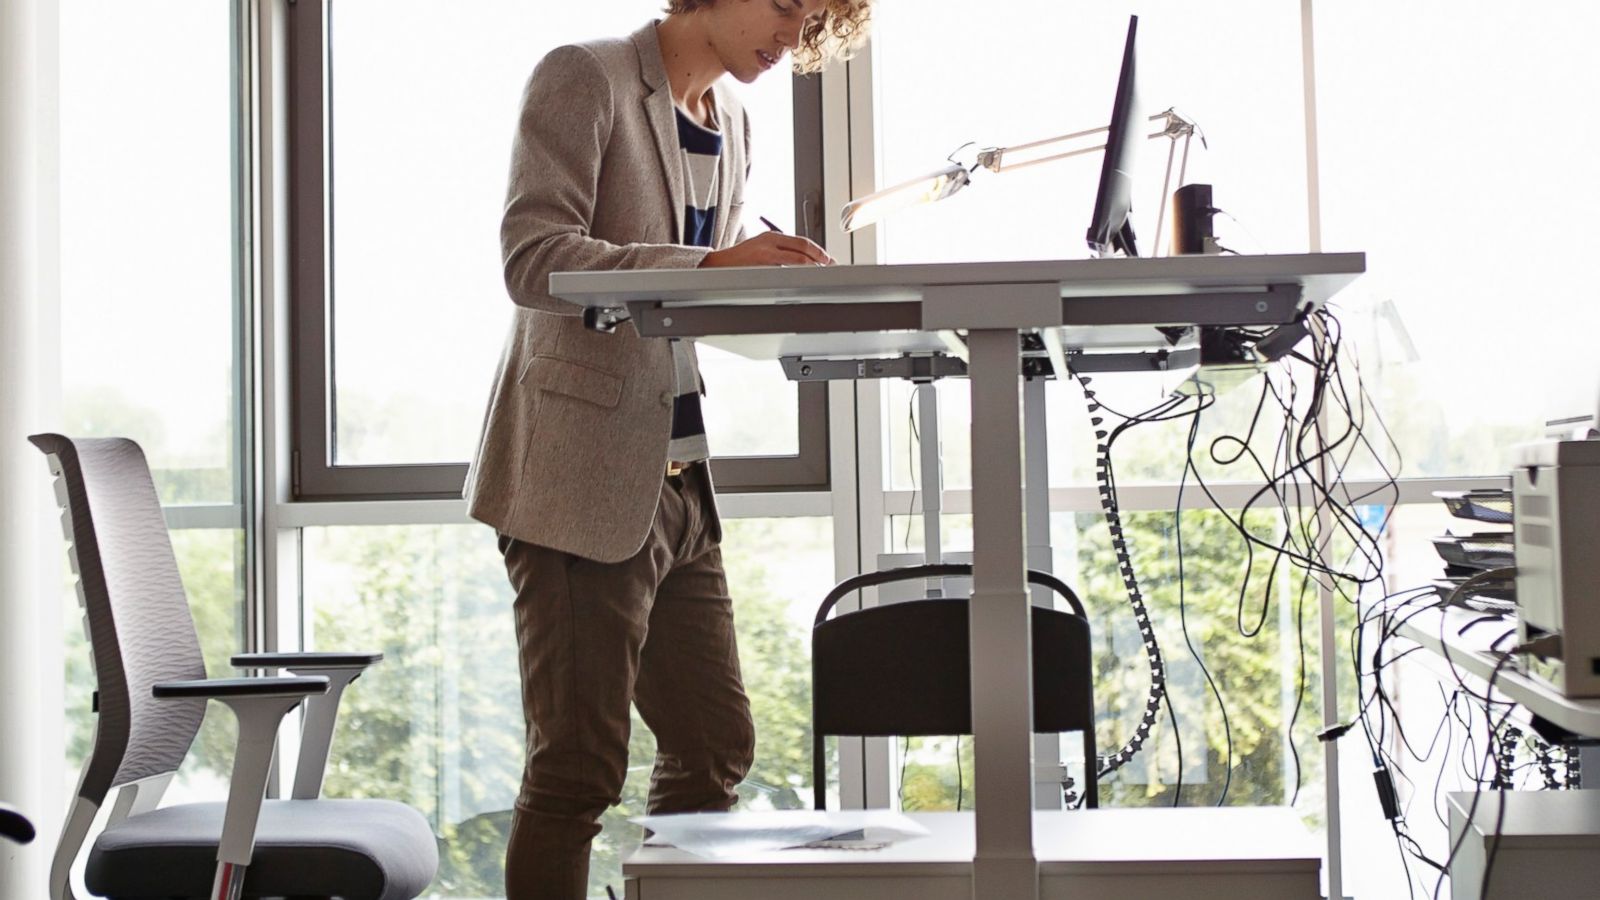 Health Benefit Of Standing Desks Not Proven Medical Review Shows